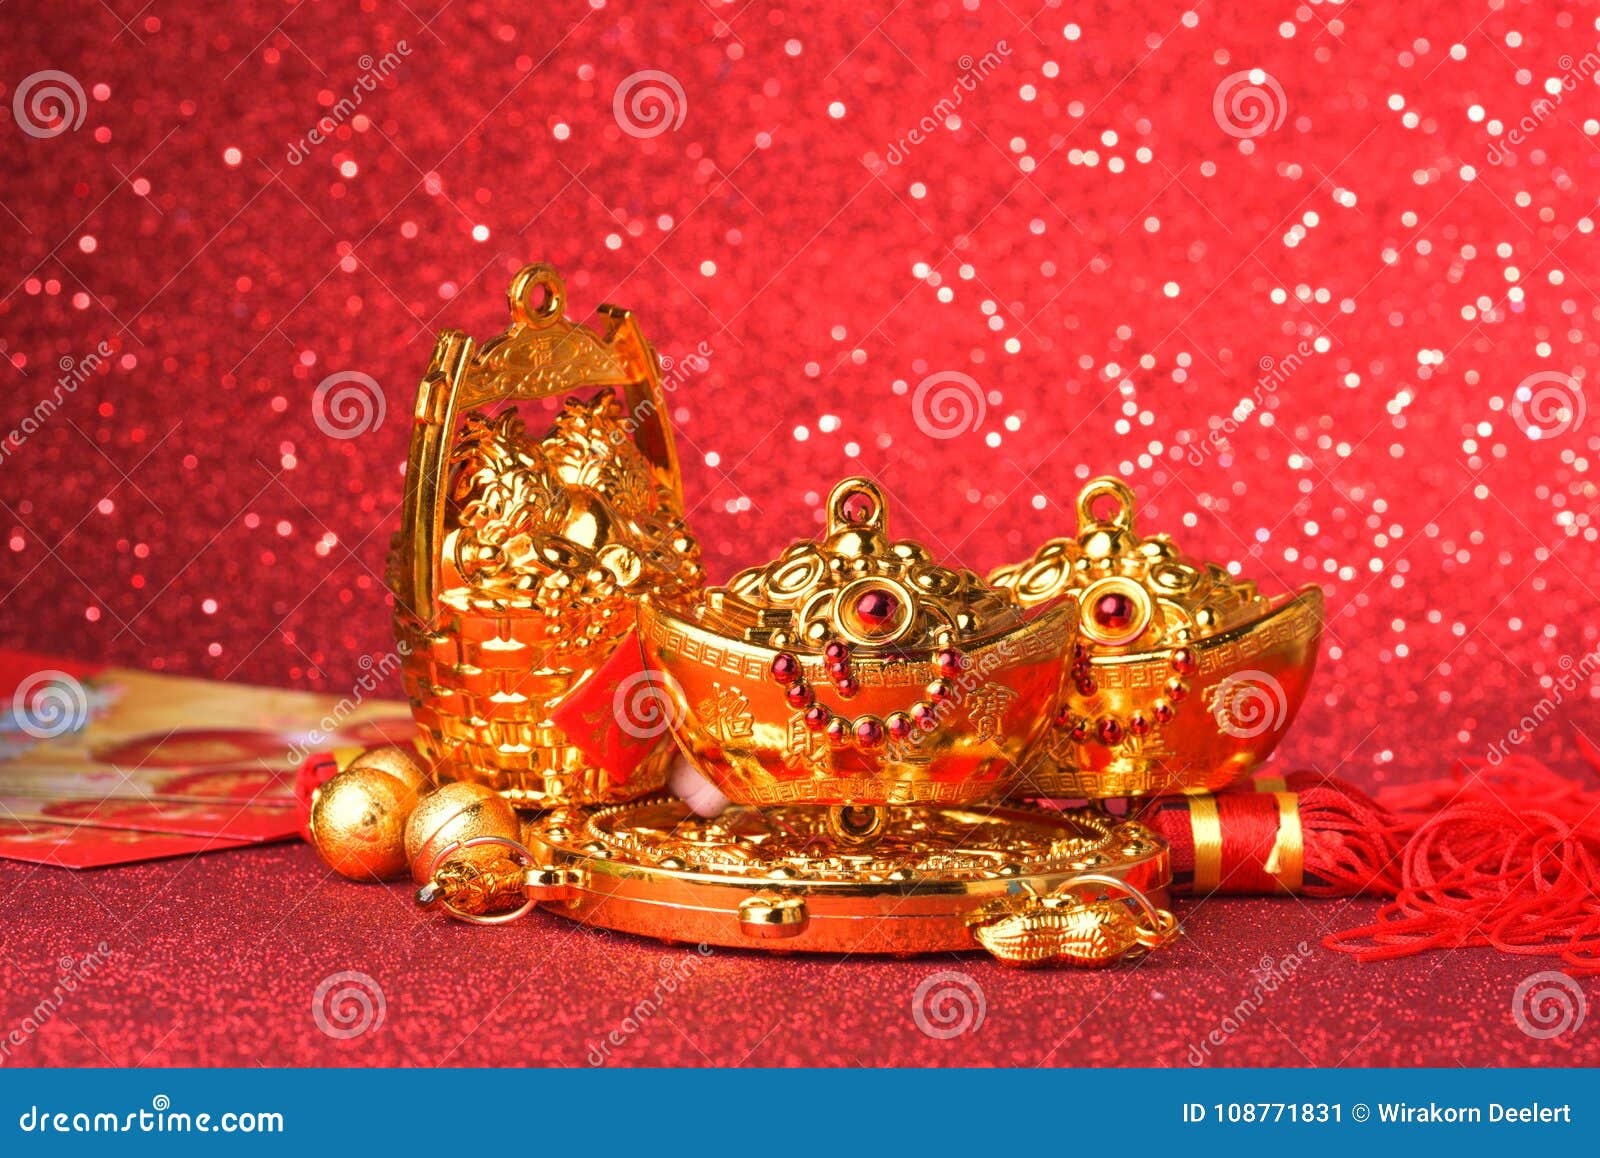 Chinese New Year Decorations And Auspicious Ornaments On ...